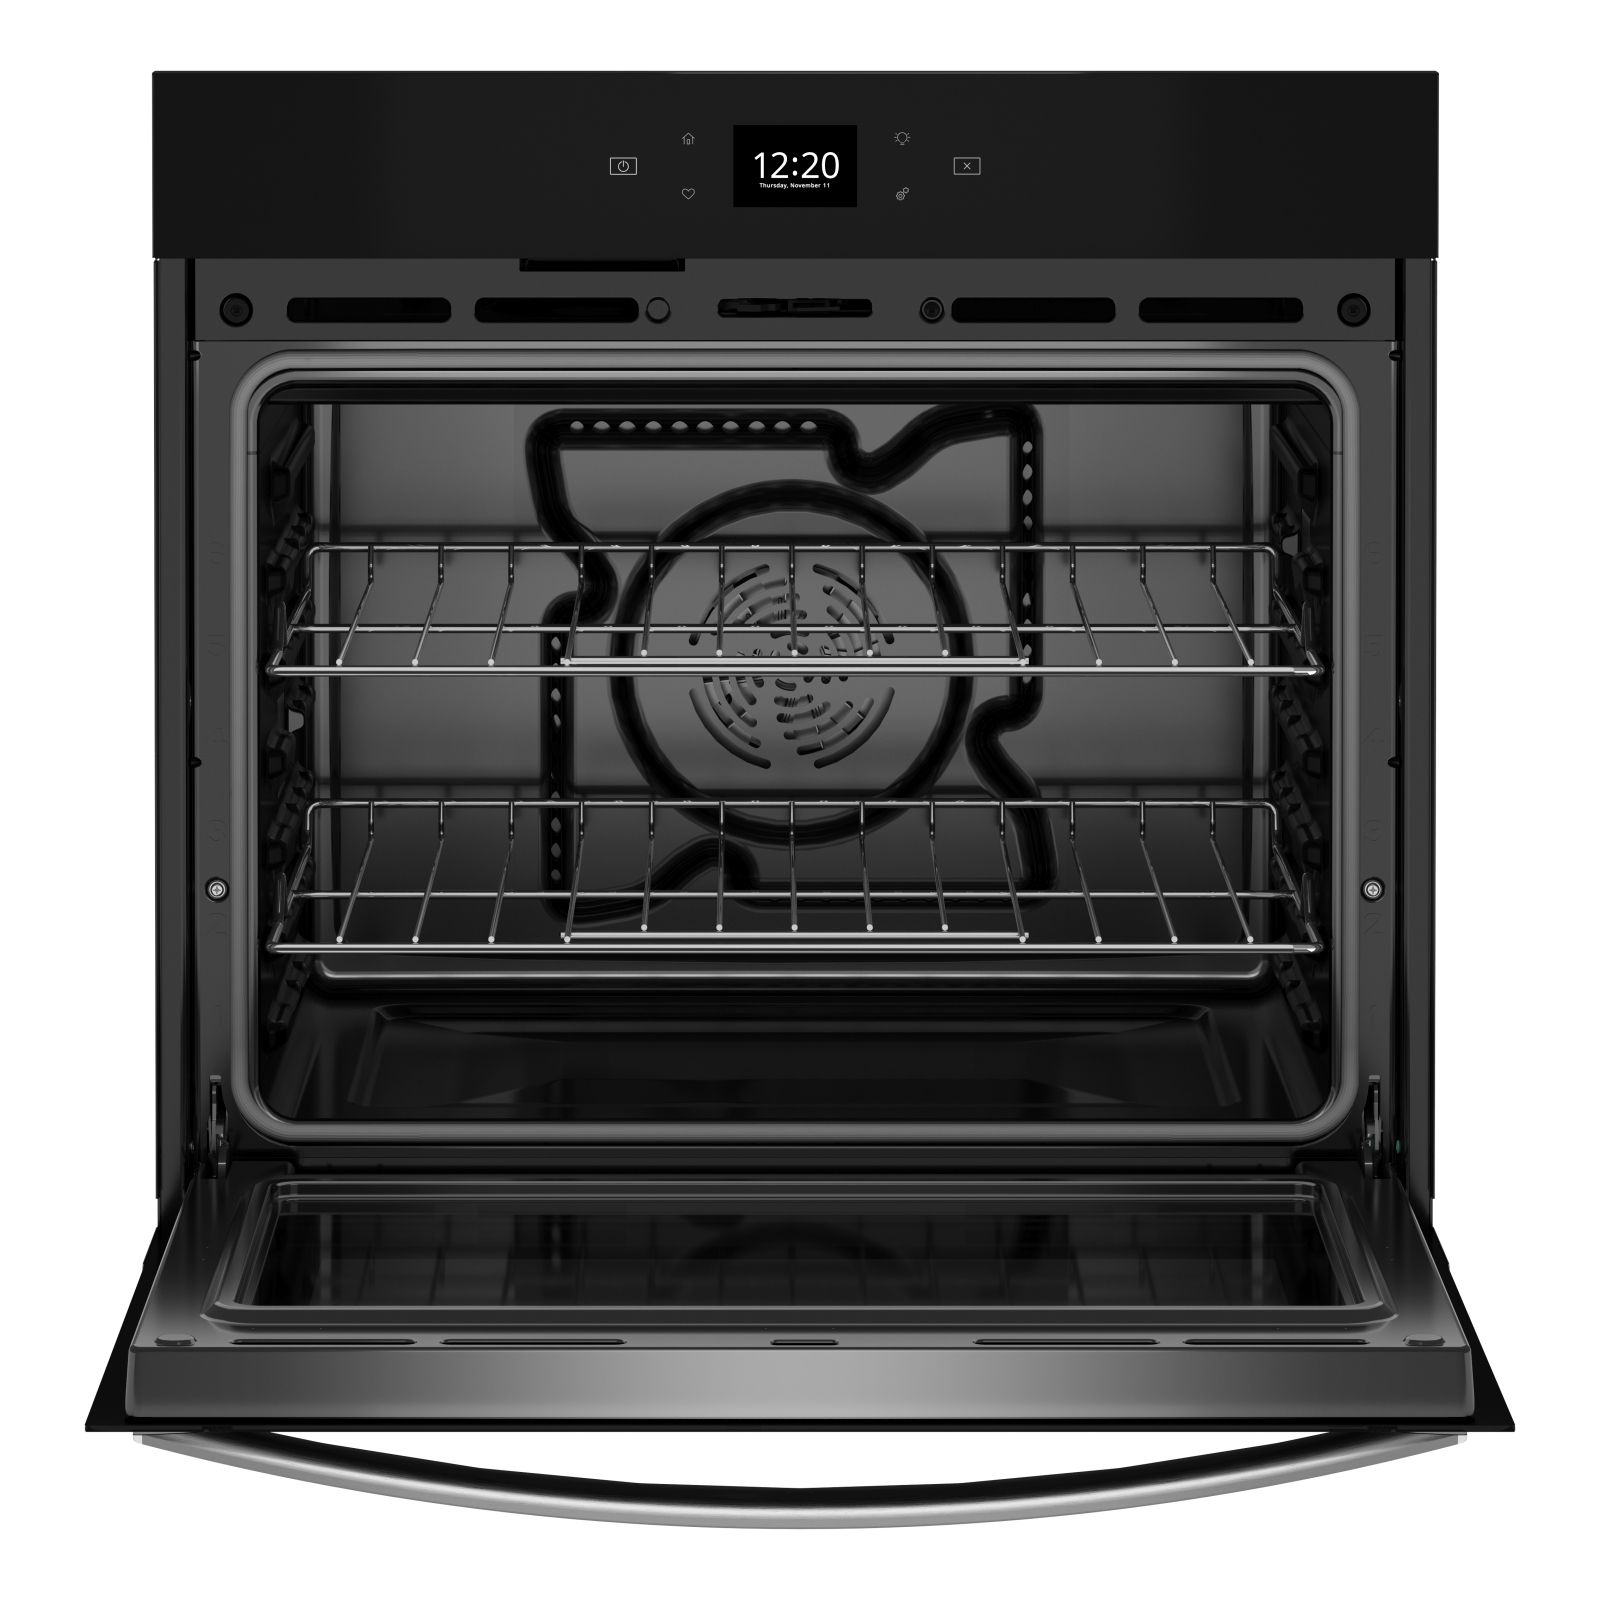 Whirlpool - 5 cu. ft Single Wall Oven in Black - WOES5030LB